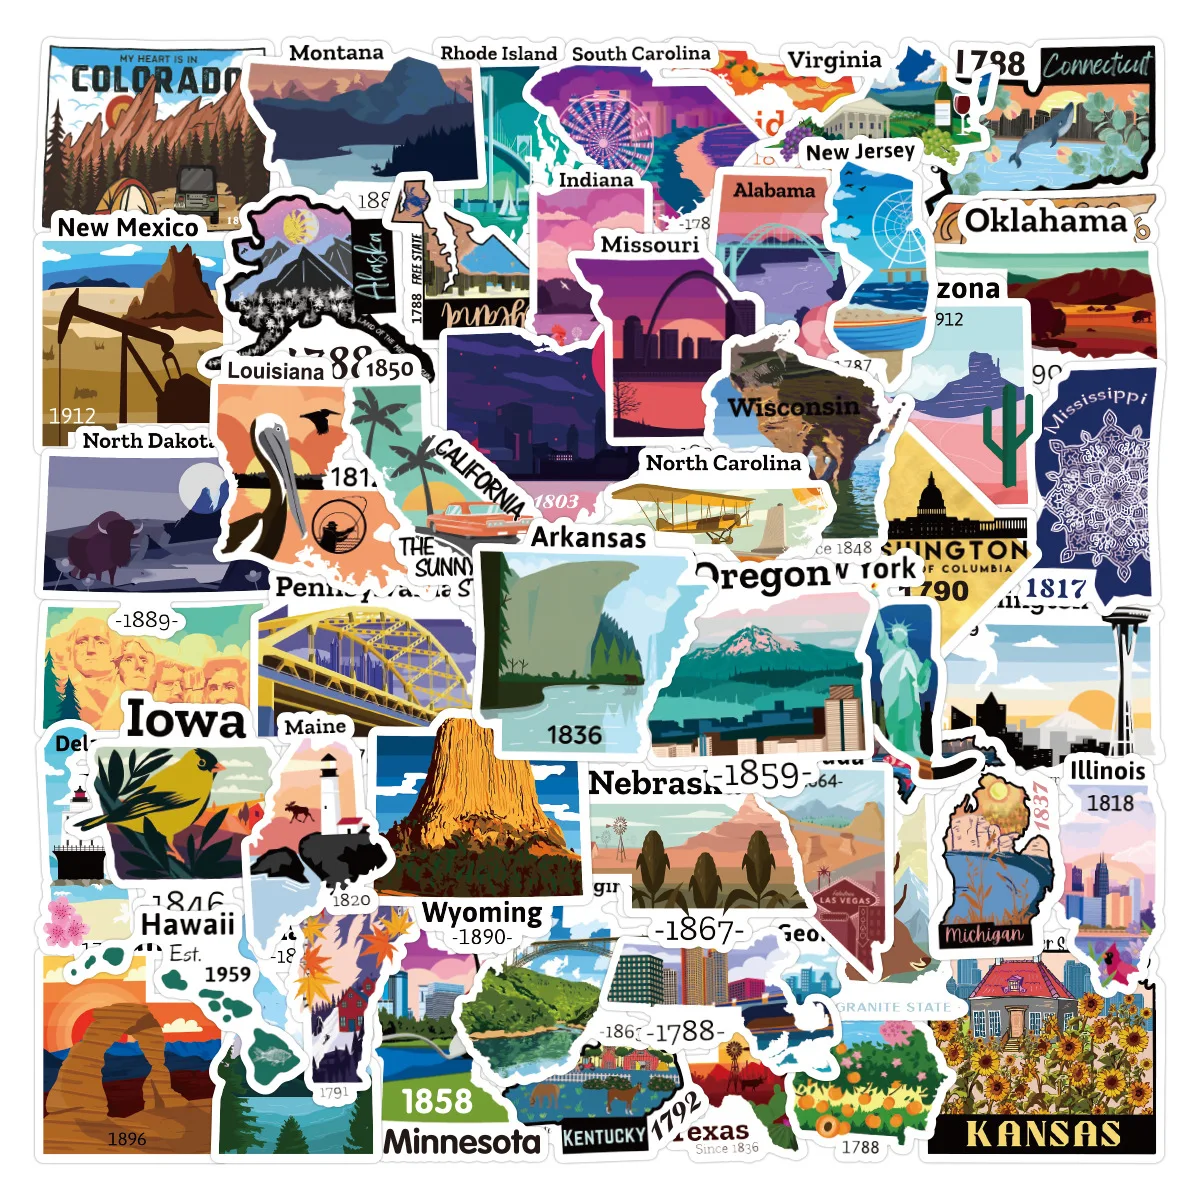 10/30/50 Pcs United States Travel City Map Waterproof Graffiti Stickers Notebook Laptop Car DIY Removable Decoration Kids Decals 65pcs world city famous architecture travel landscape graffiti stickers laptop luggage phone scrapbook decal kids toy sticker